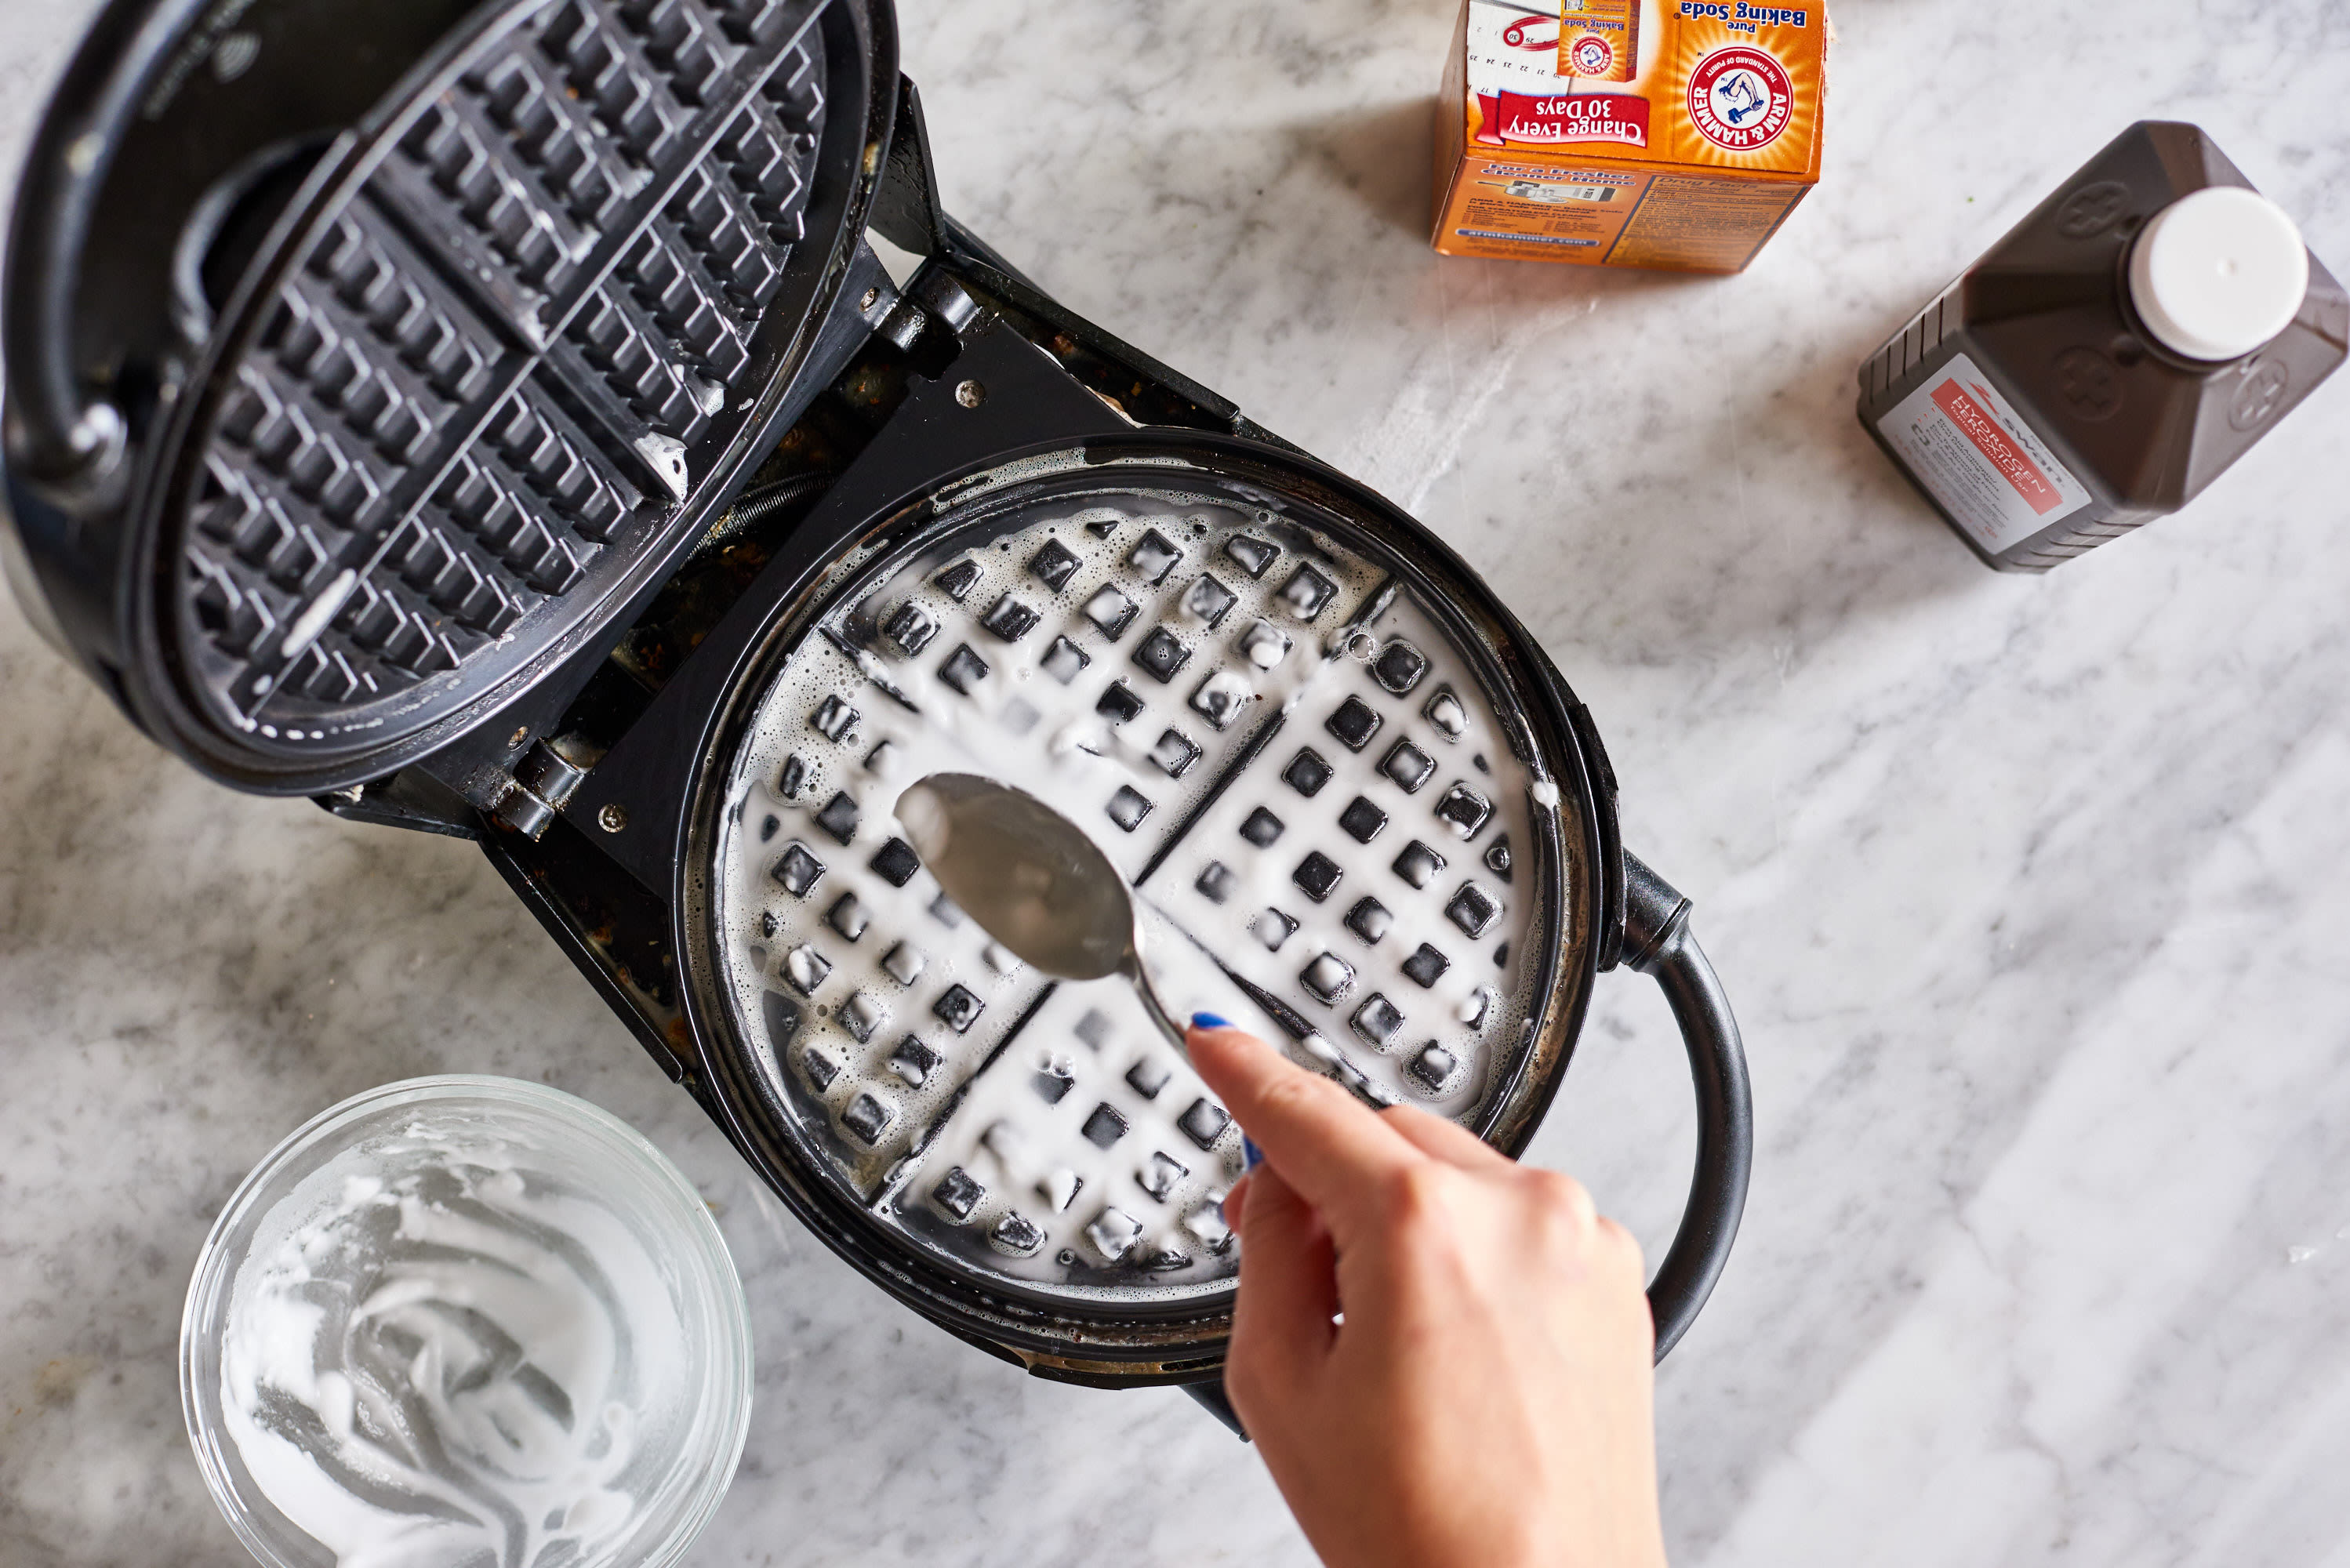 https://cdn.apartmenttherapy.info/image/upload/v1566580106/k/Photo/Lifestyle/2019-09-how-to-clean-a-waffle-iron/How-to-Clean-an-Impossibly-Gross-Waffle-Iron_062.jpg